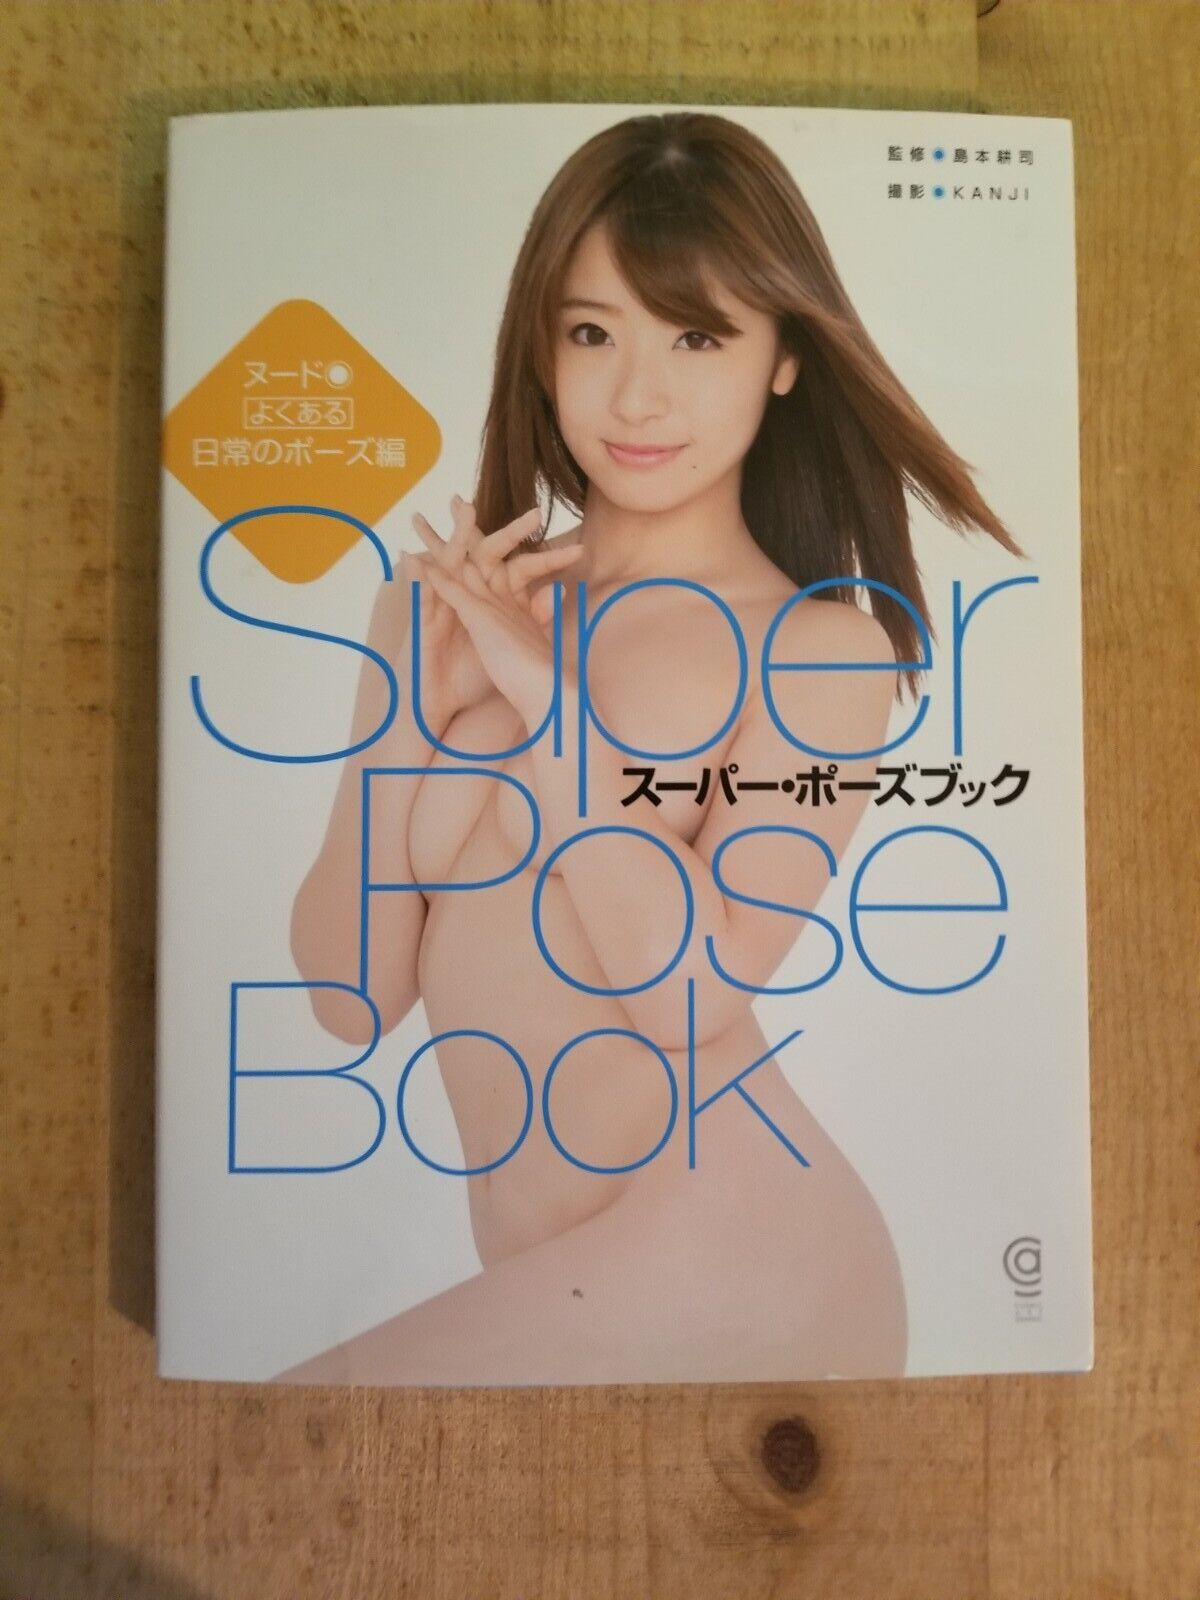 Super Pose Book  How To Draw Posing Art Book From Japan